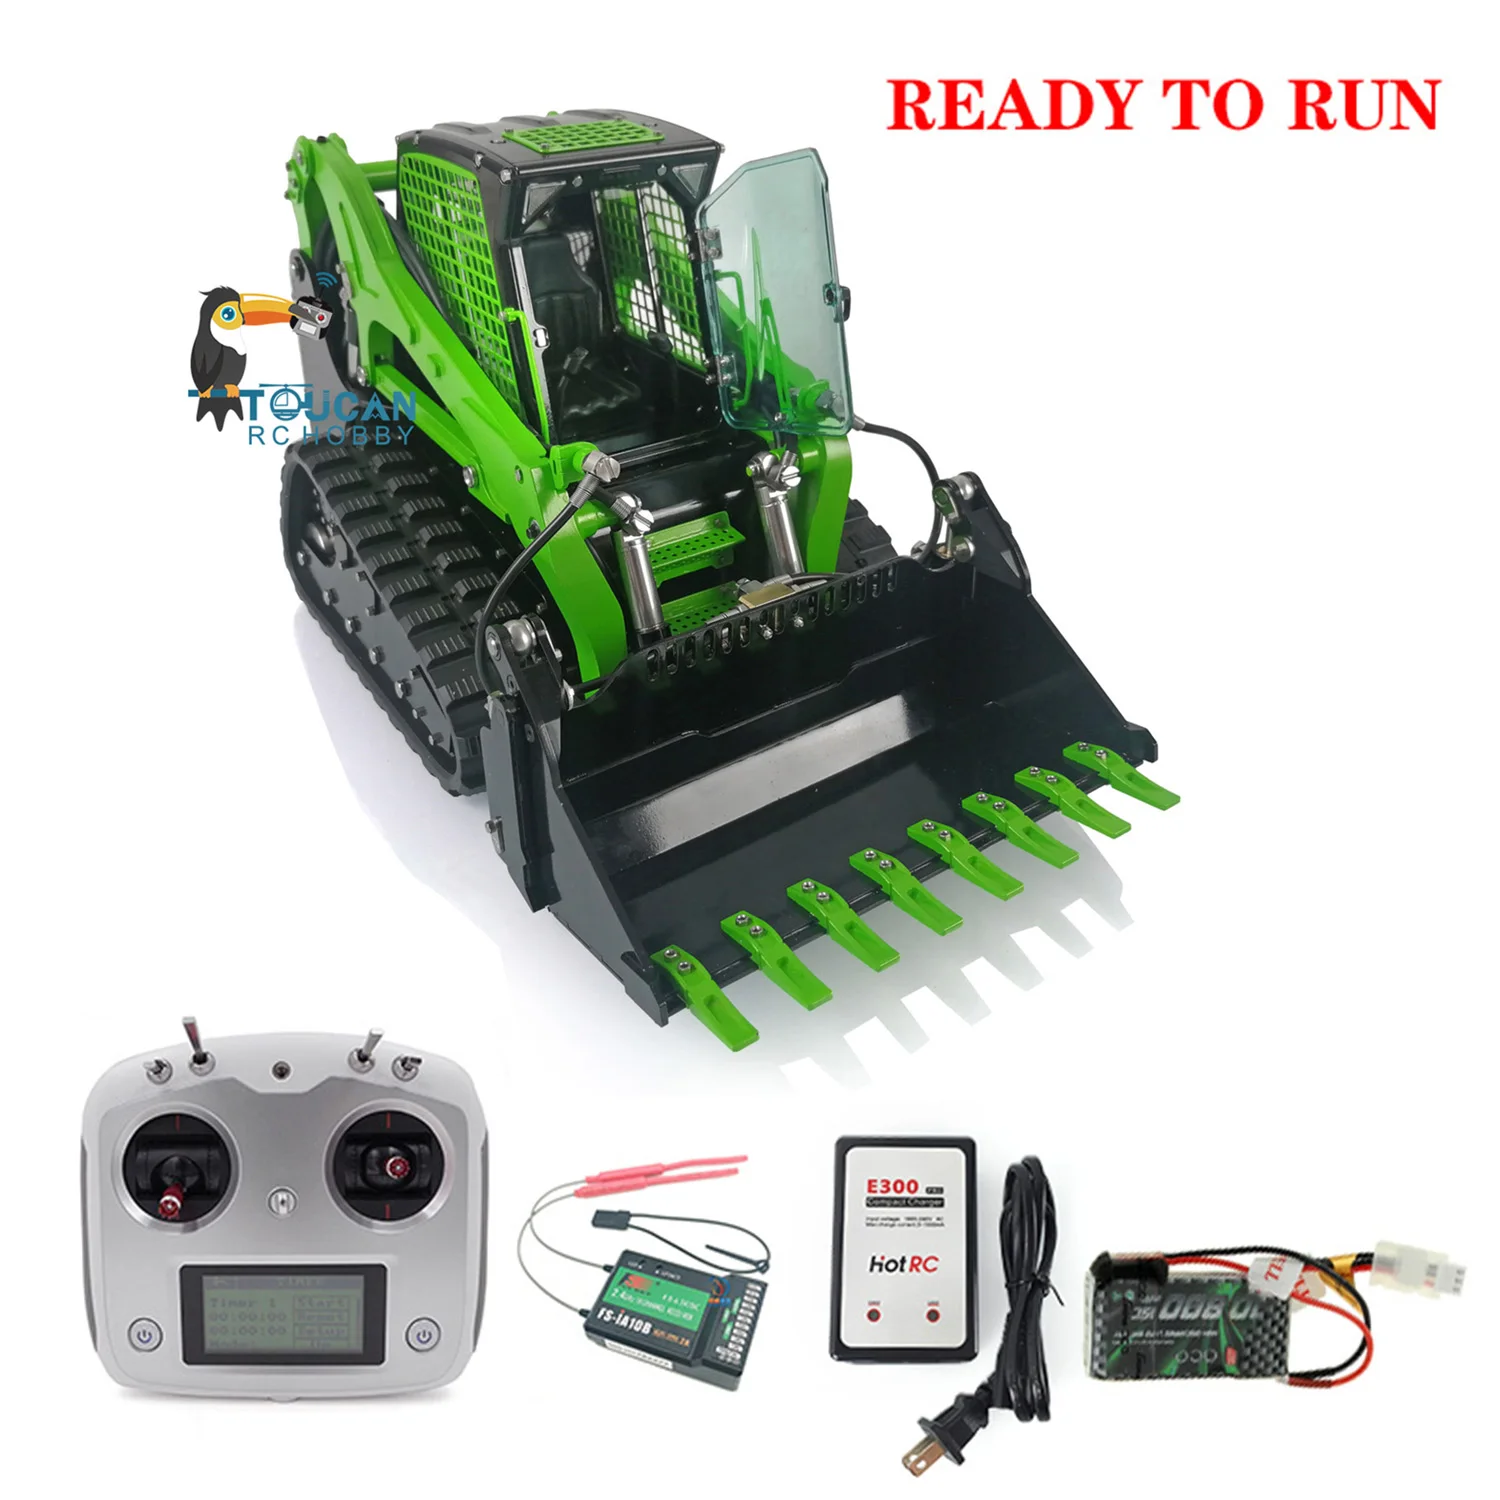 

LESU 1/14 Metal Aoue-LT5 Tracked Skid-Steer RC Hydraulic Loader RTR Version Remote Control Car Model Toys Gifts THZH1211-SMT4